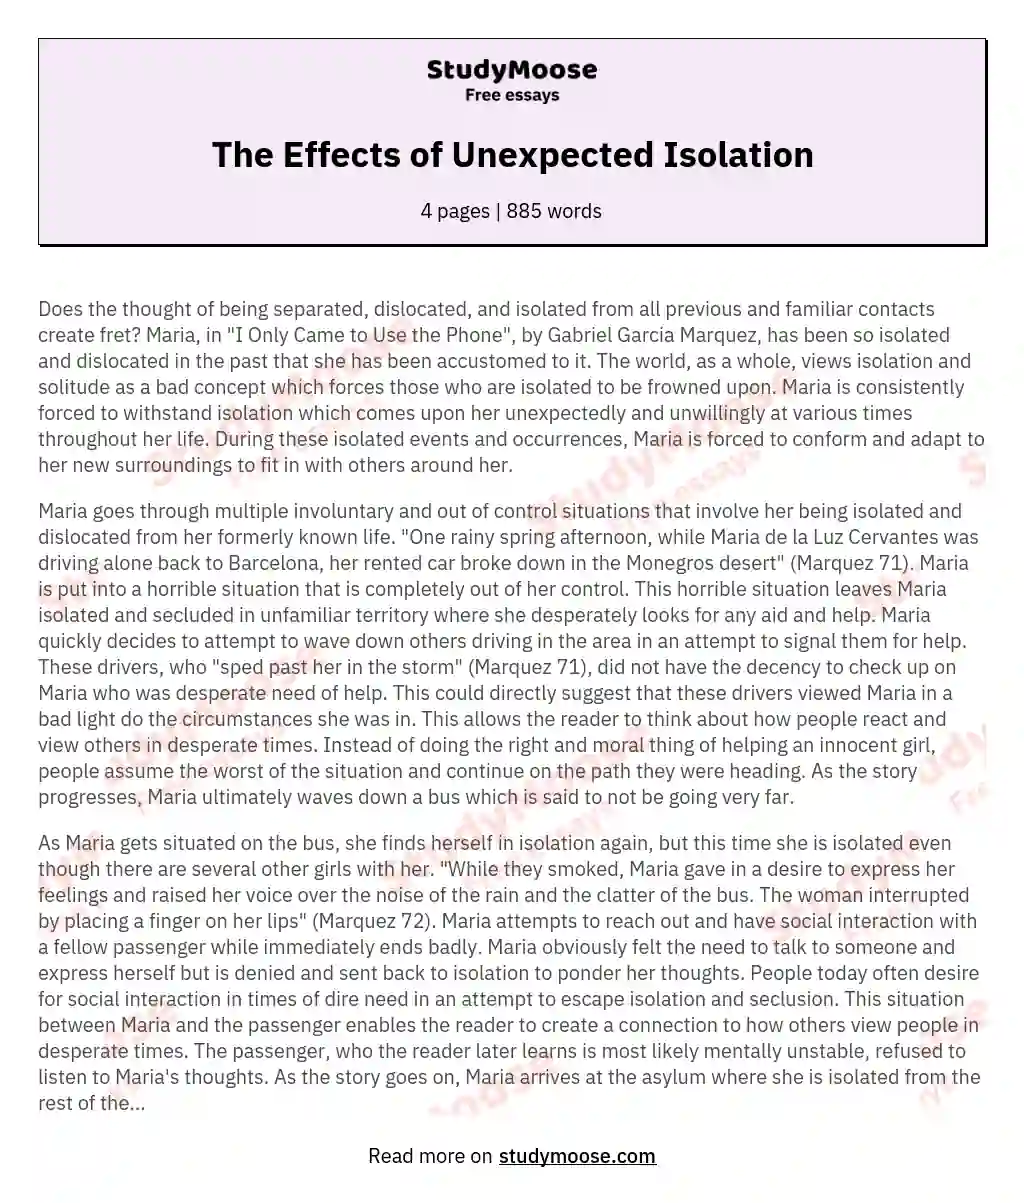 The Effects of Unexpected Isolation essay